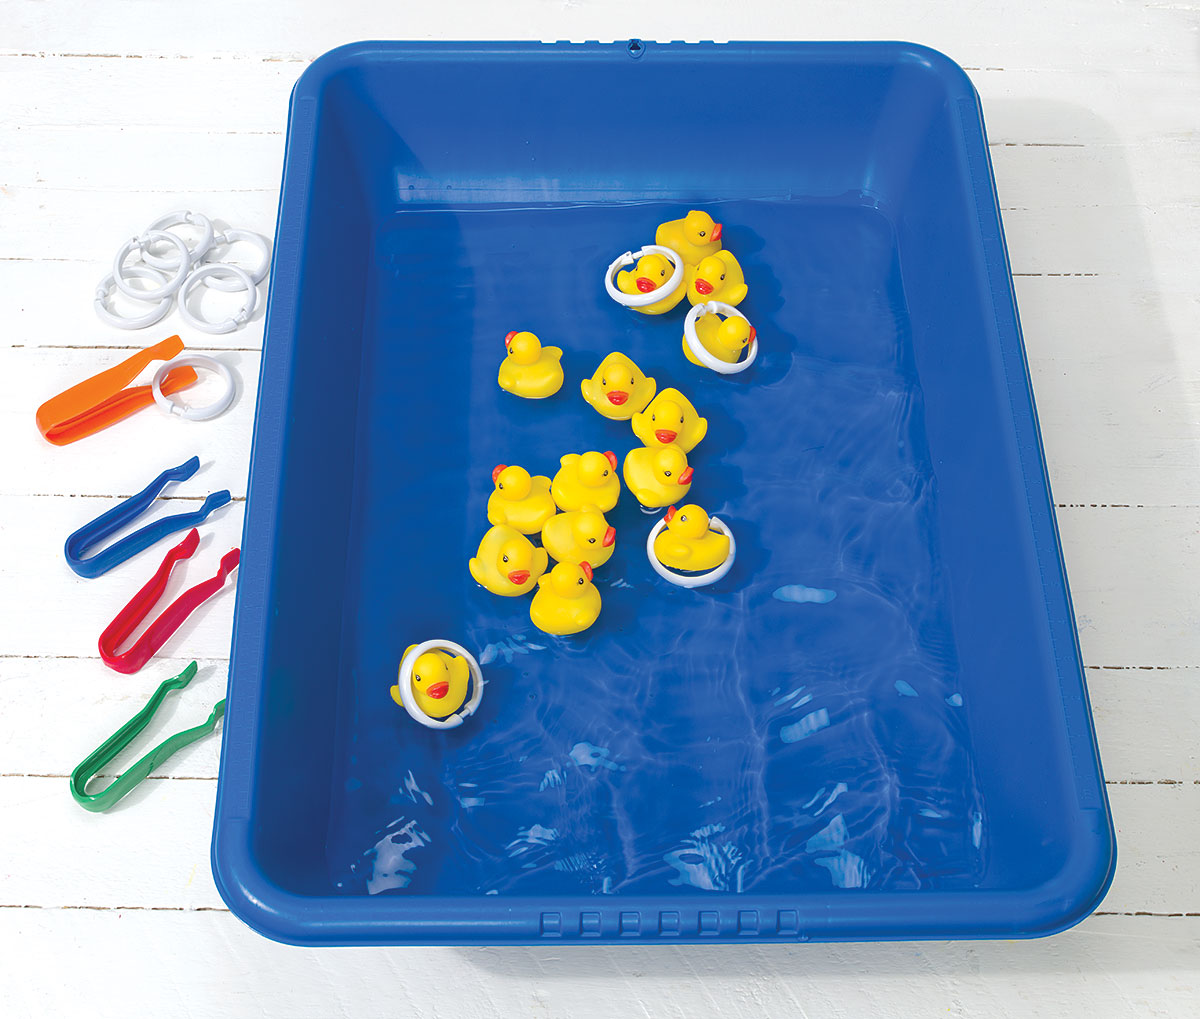 Counting Ducks STEM Activity